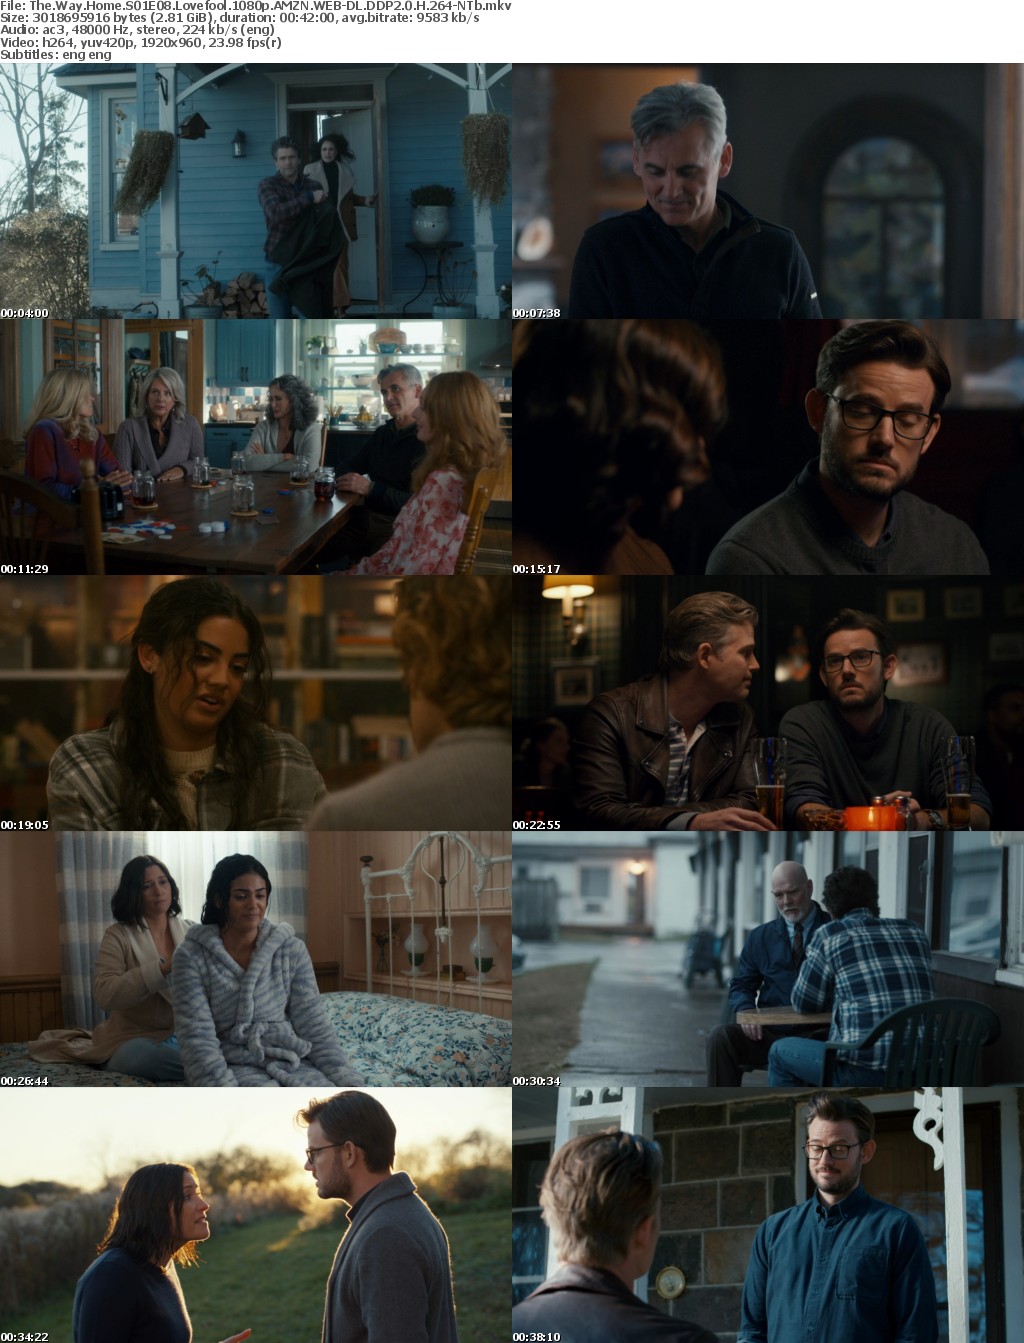 The Way Home S01E08 Lovefool 1080p AMZN WEB-DL DDP2 0 H 264-NTb